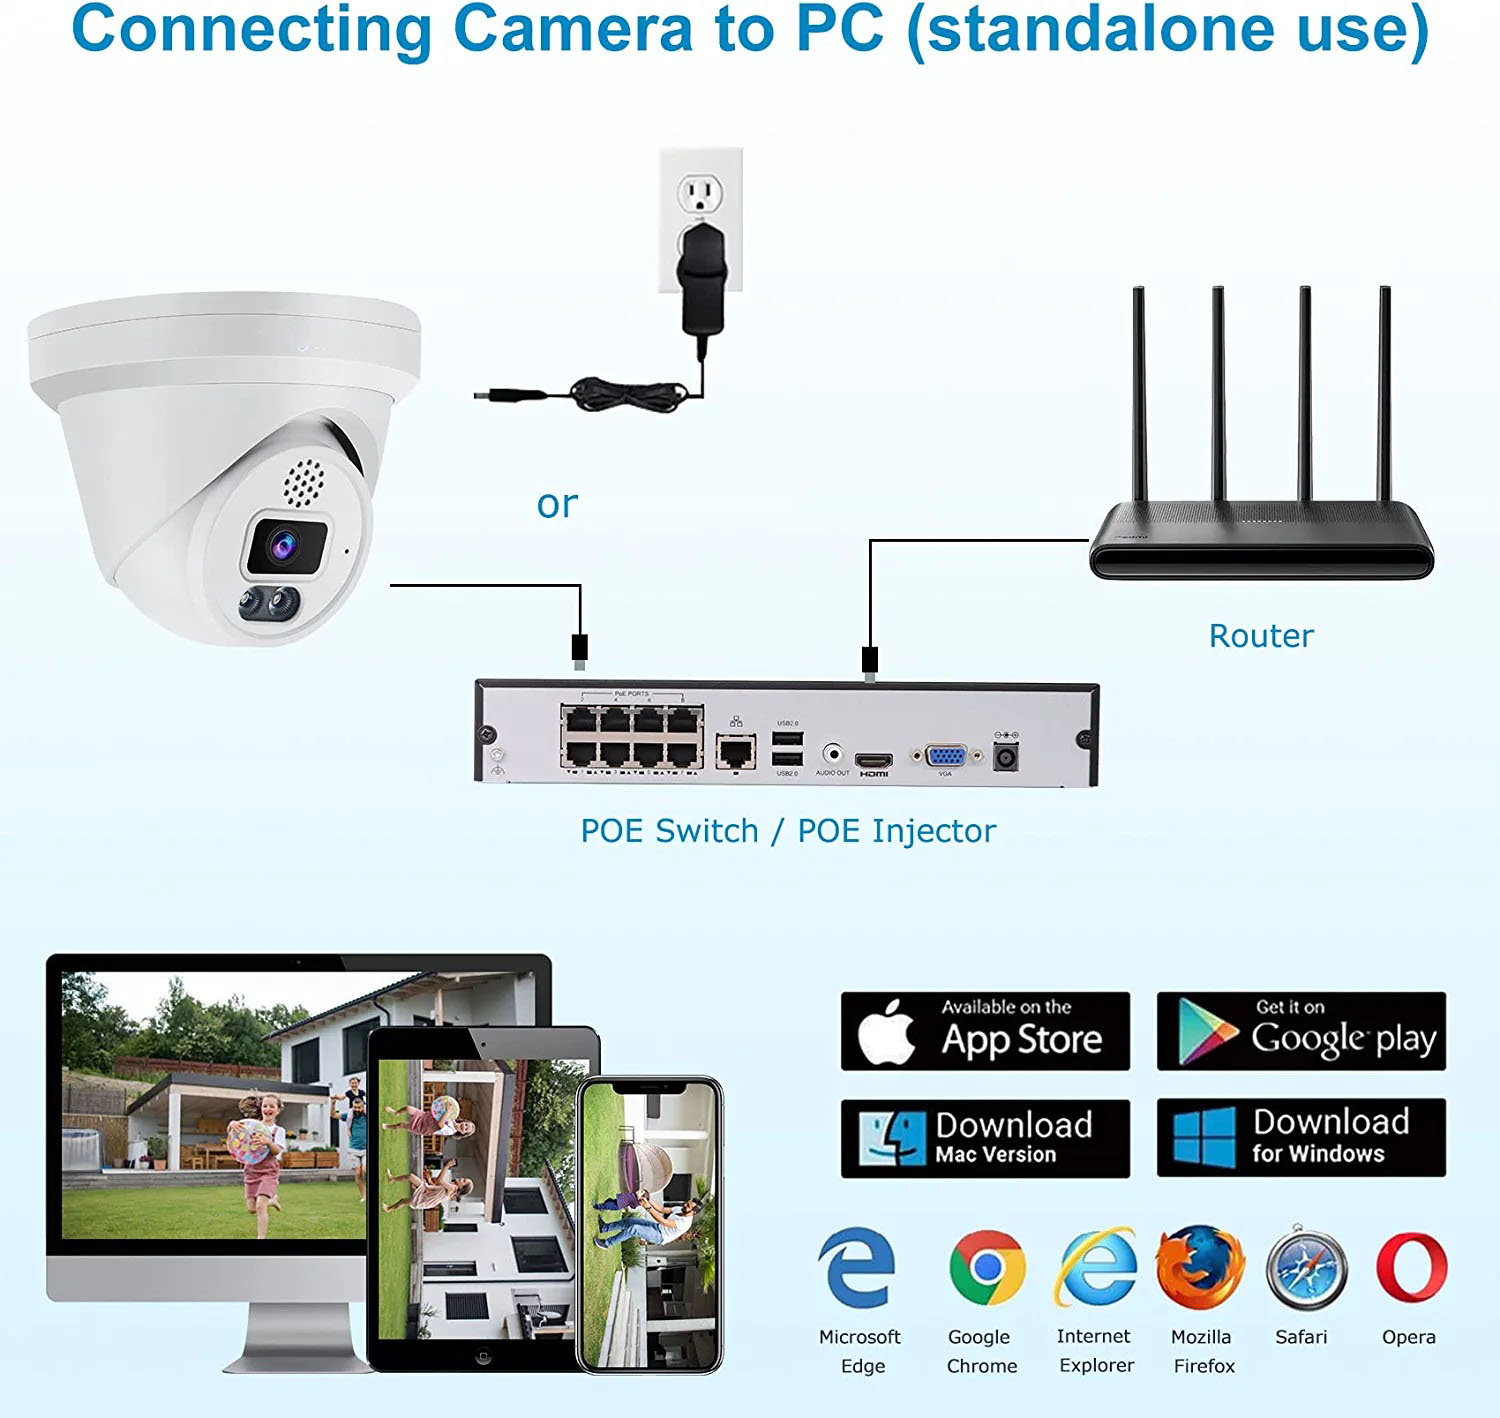 Microseven Open Source 6MP (3072x2048) Full Color Night Vision PoE Indoor / Outdoor IP Camera, UltraHD 6MP PoE IP Turret Security Camera with Human/Vehicle Detection, Two-Way Audio Wide Angle, WDR, DNR, 256GB SD Slot, Waterproof, ONVIF CCTV Surveillance Camera, Web GUI & Apps, VMS (Video Management System) Cloud Storage+ Broadcasting on YouTube, Facebook & Microseven.tv